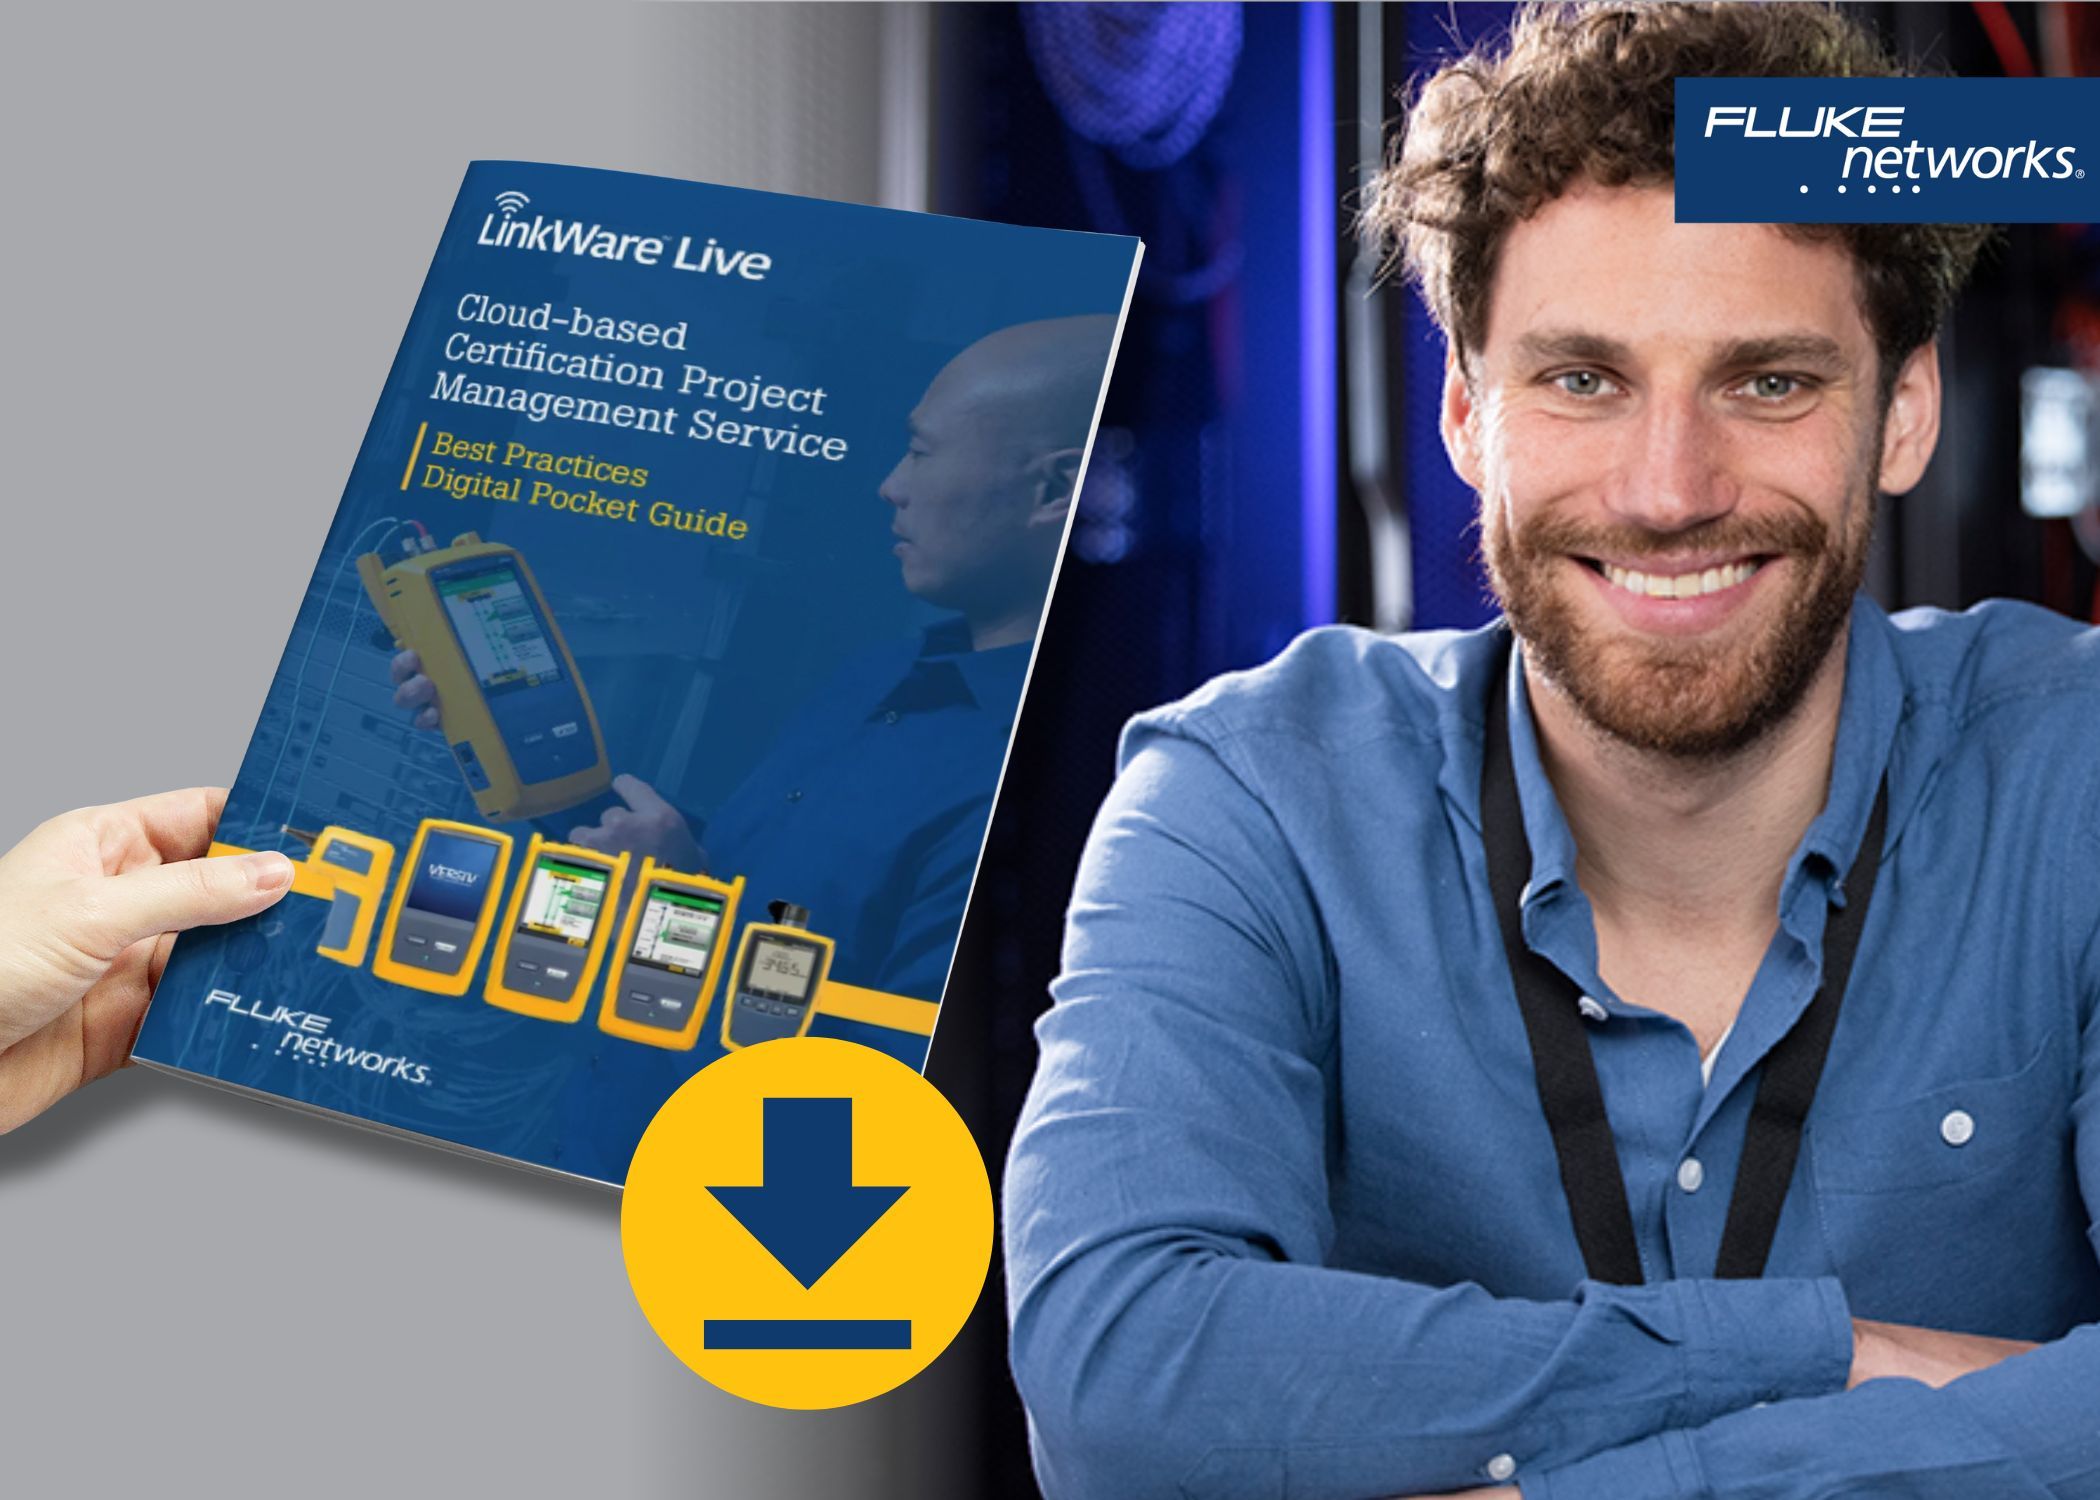 Fluke Networks launches new digital pocket guide for cloud-based network certification project management